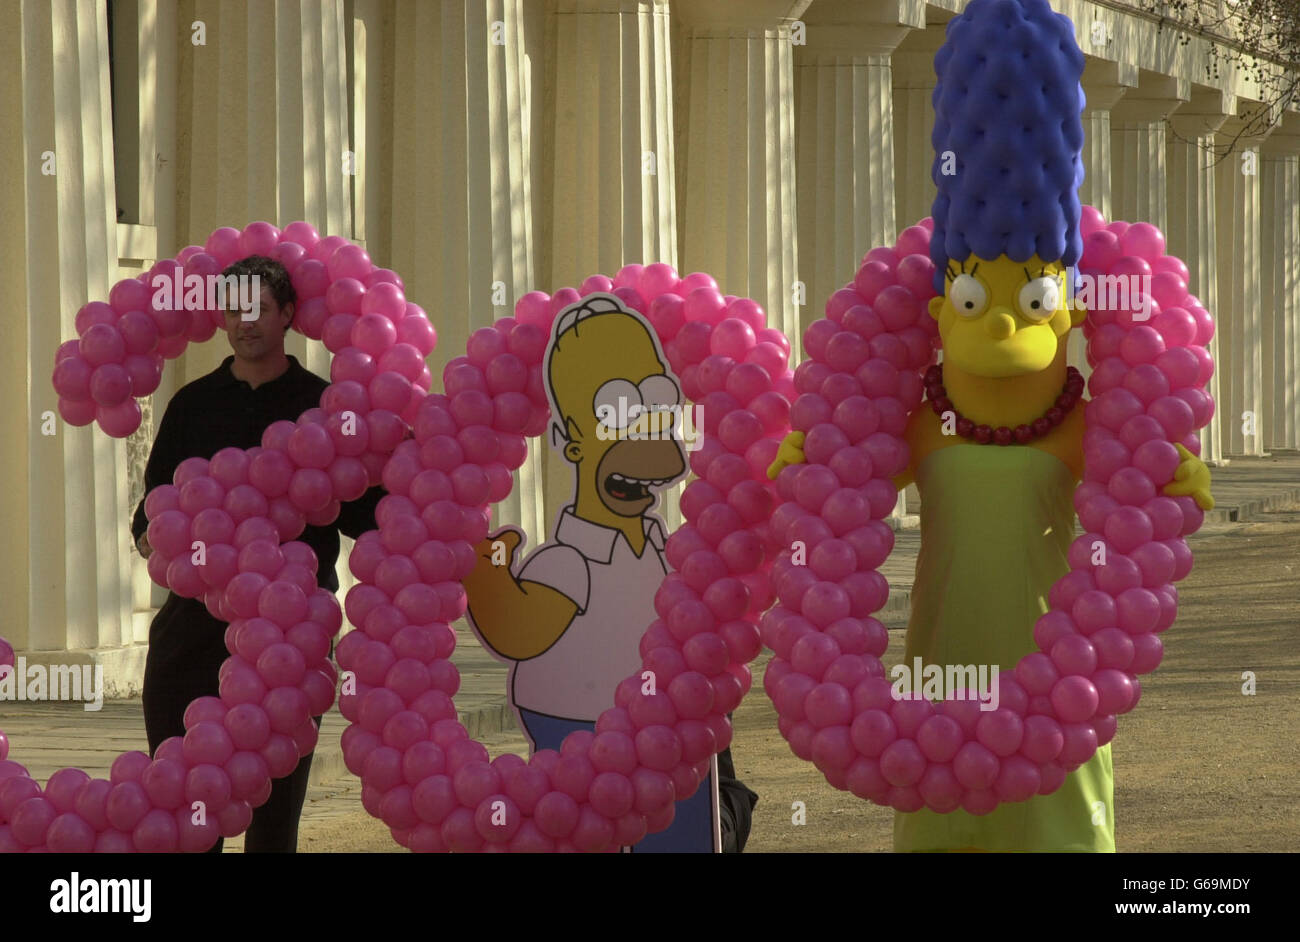 Executive Producer of the Simpsons Al Jean poses with Marge Simpson during a photocall to celebrate the 300th episode of the Simpsons in central London. Stock Photo